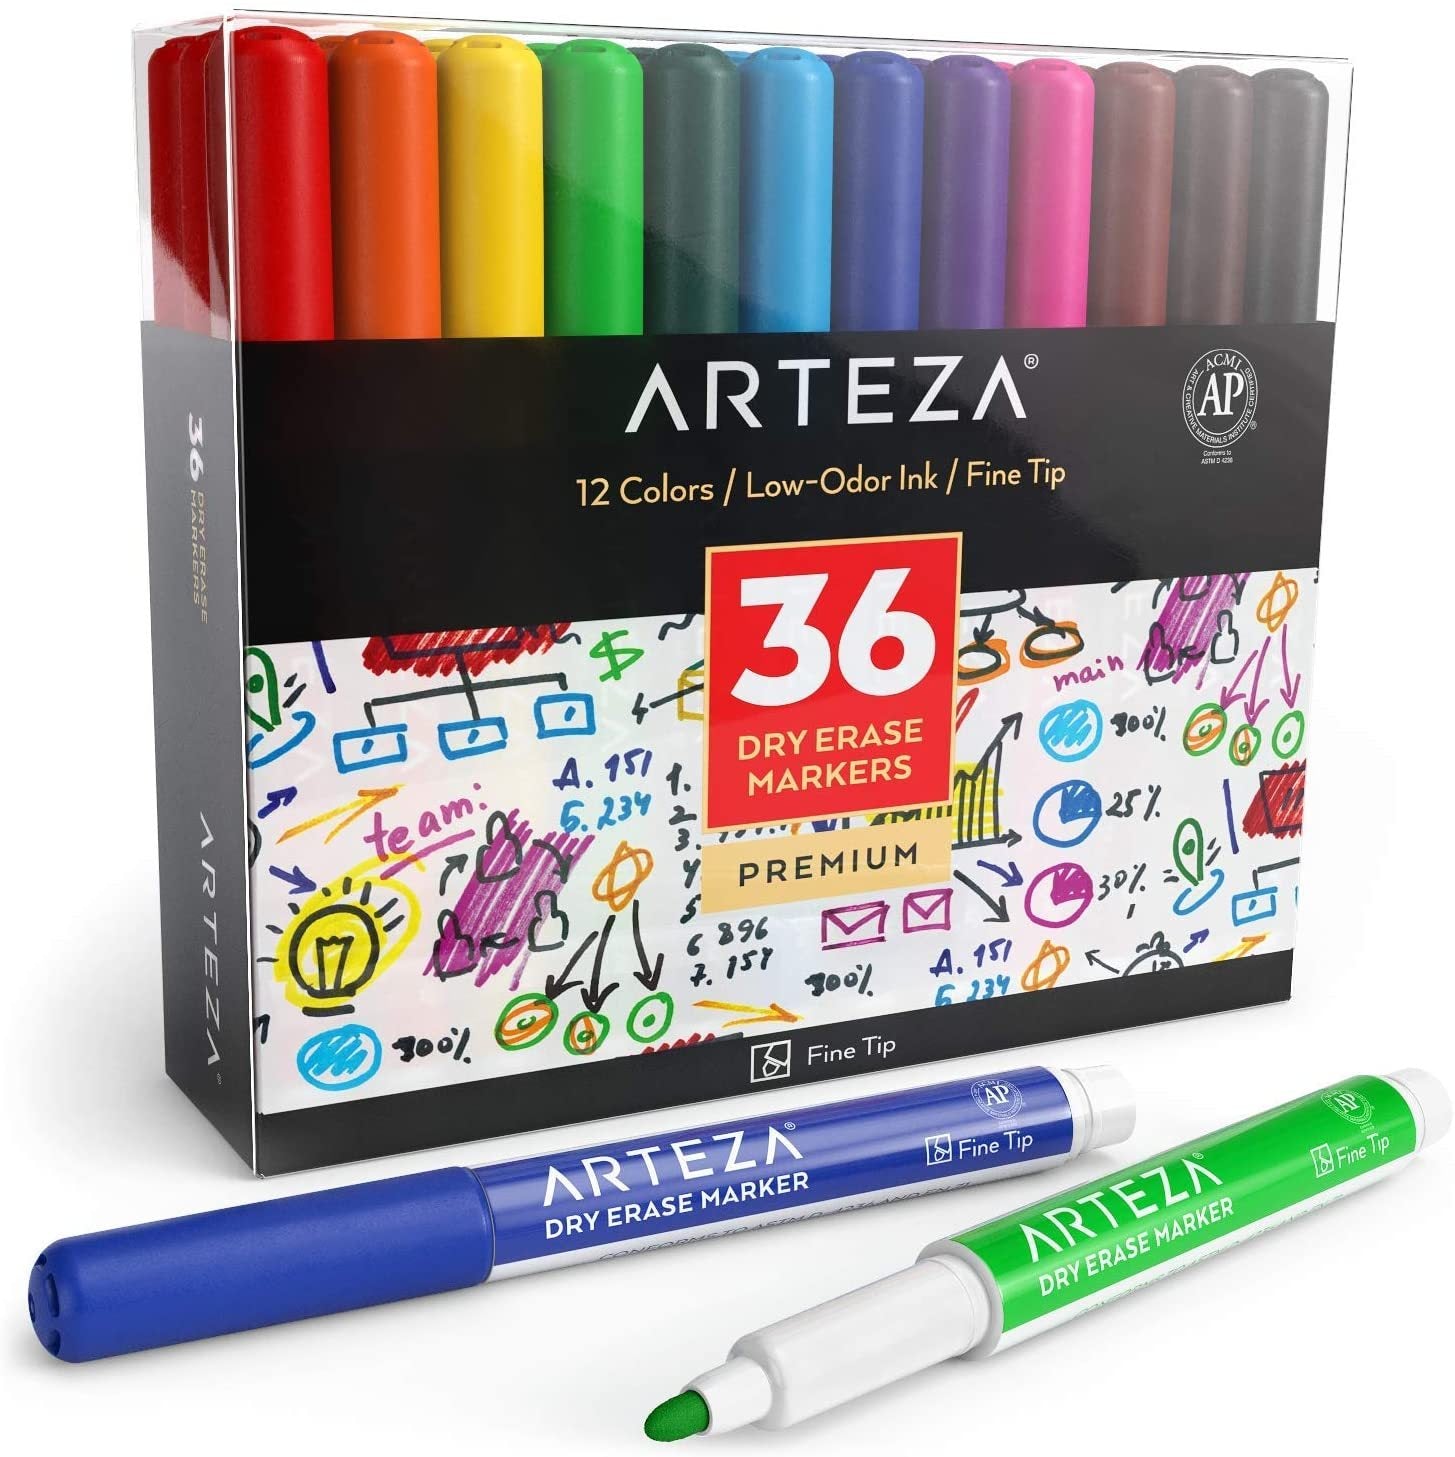 Arteza Dry Erase Markers, Pack of 36 with Fine Tip, 12 Assorted Colors with Low